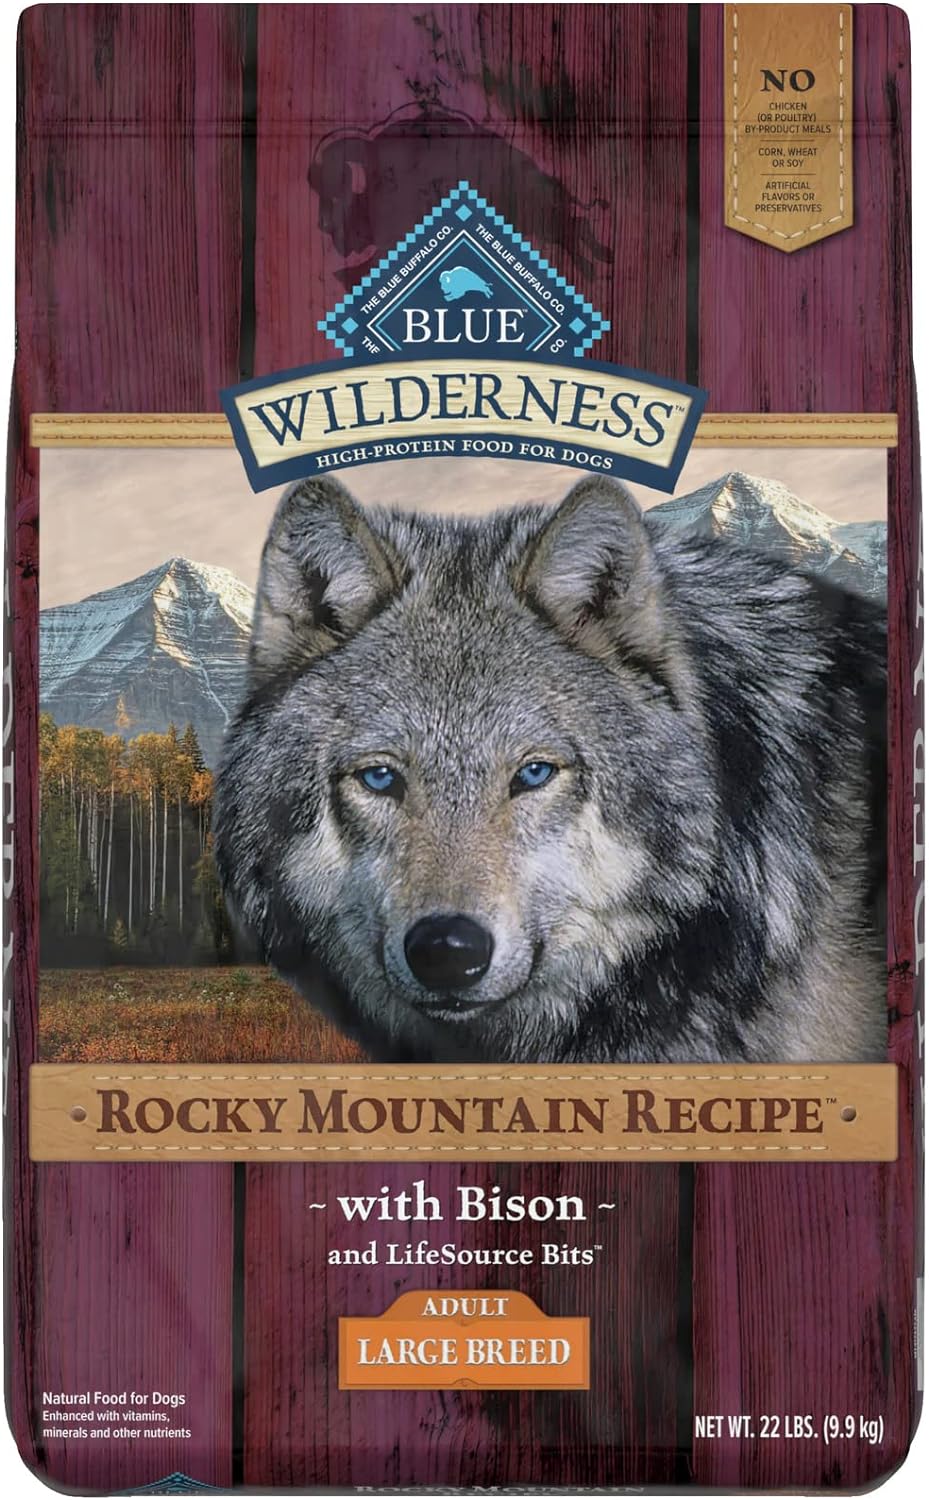 Blue Wilderness Rocky Mountain Recipe Large Breed Adult Bison Grain-Free Dry Dog Food – Gallery Image 1